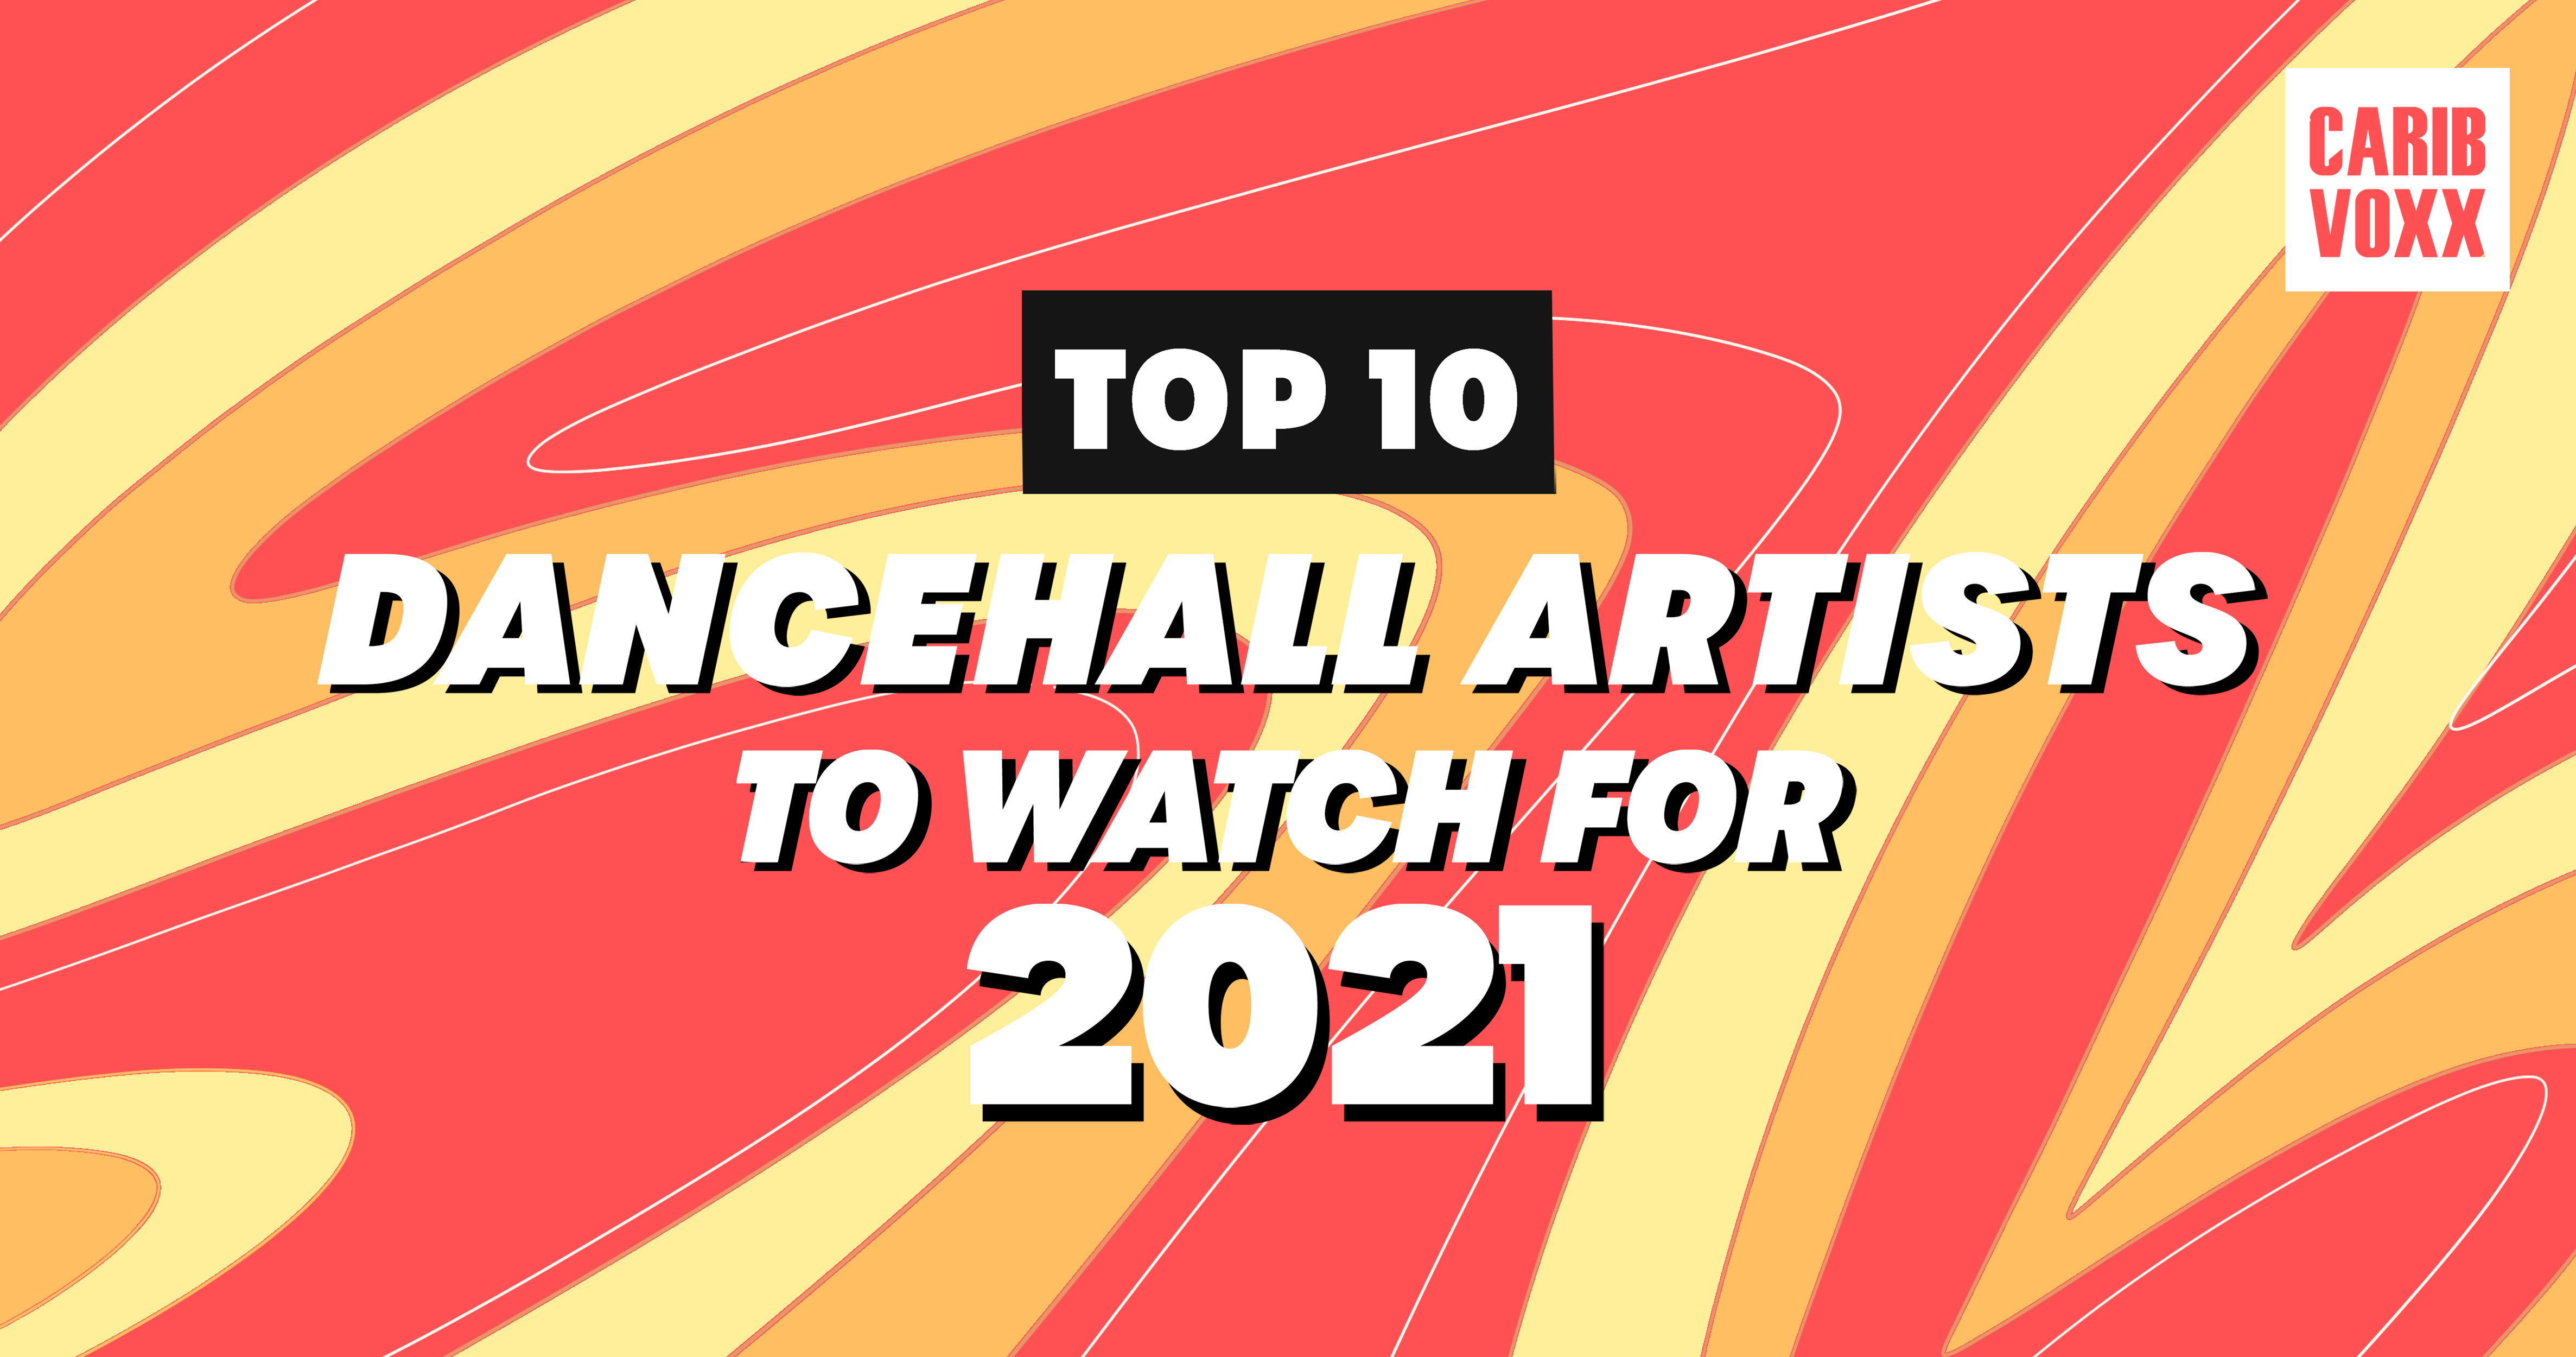 Top 10 Dancehall Artists to Watch for 2021